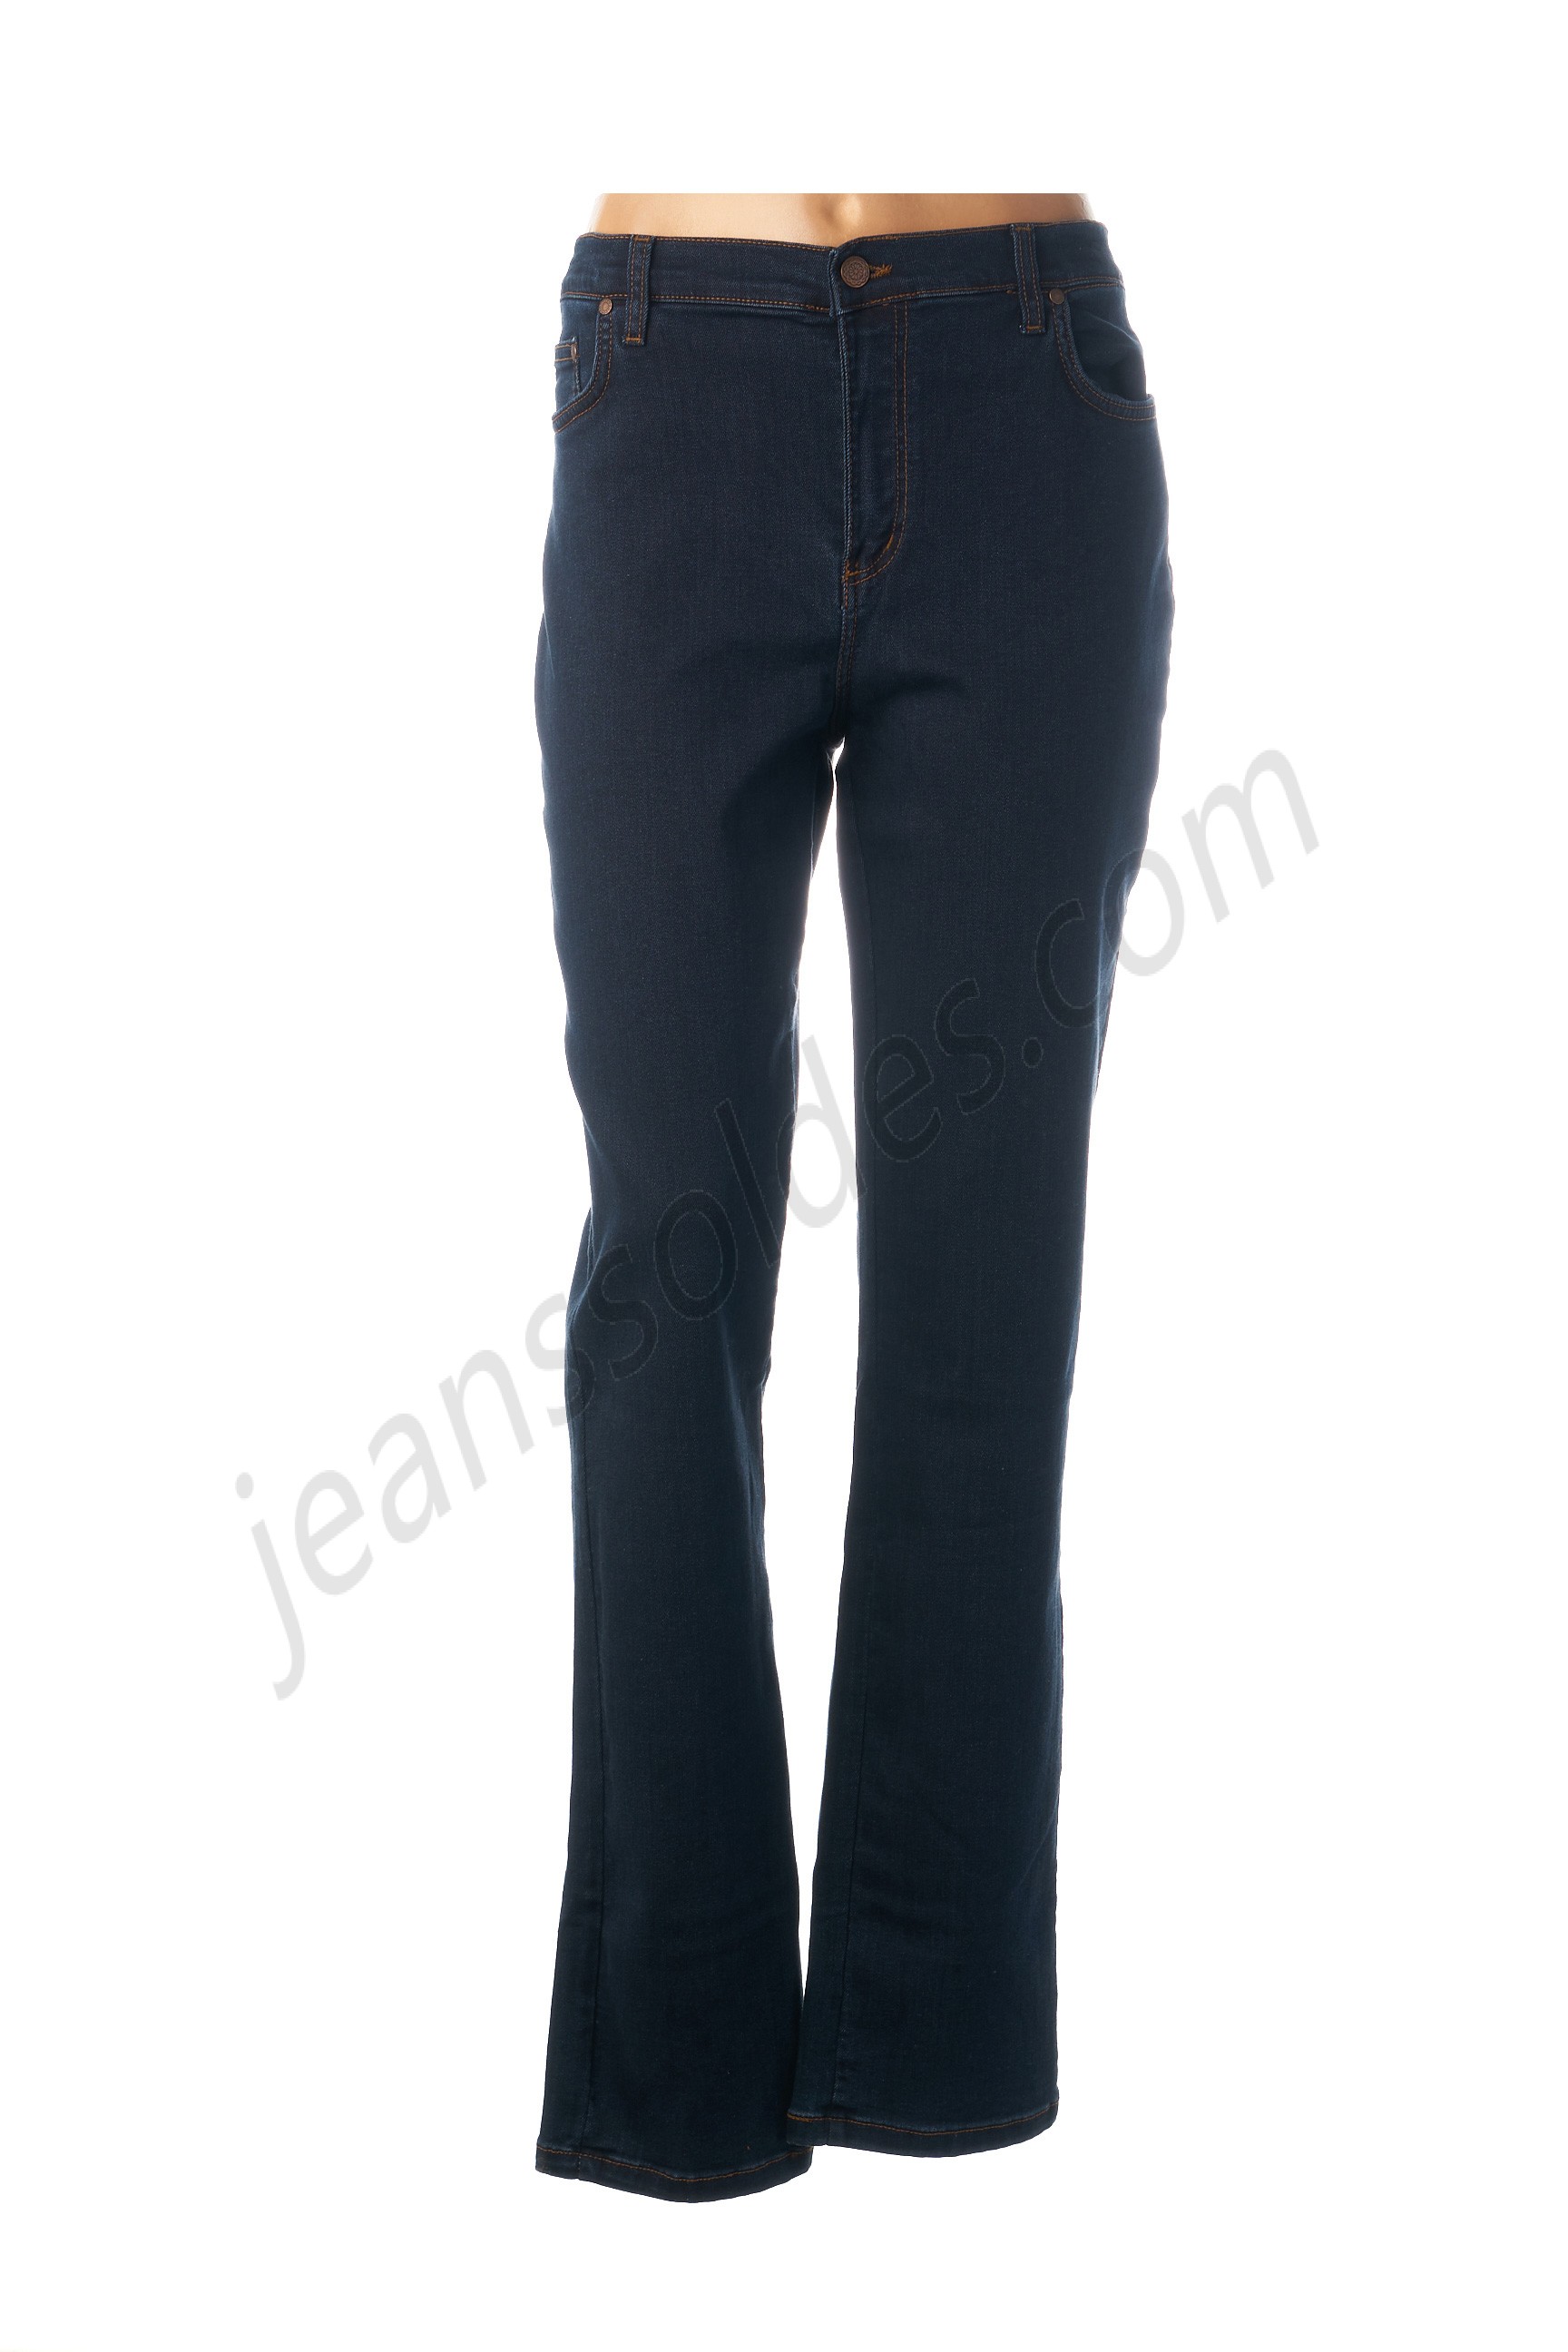 anne kelly-Jeans coupe slim prix d’amis - anne kelly-Jeans coupe slim prix d’amis